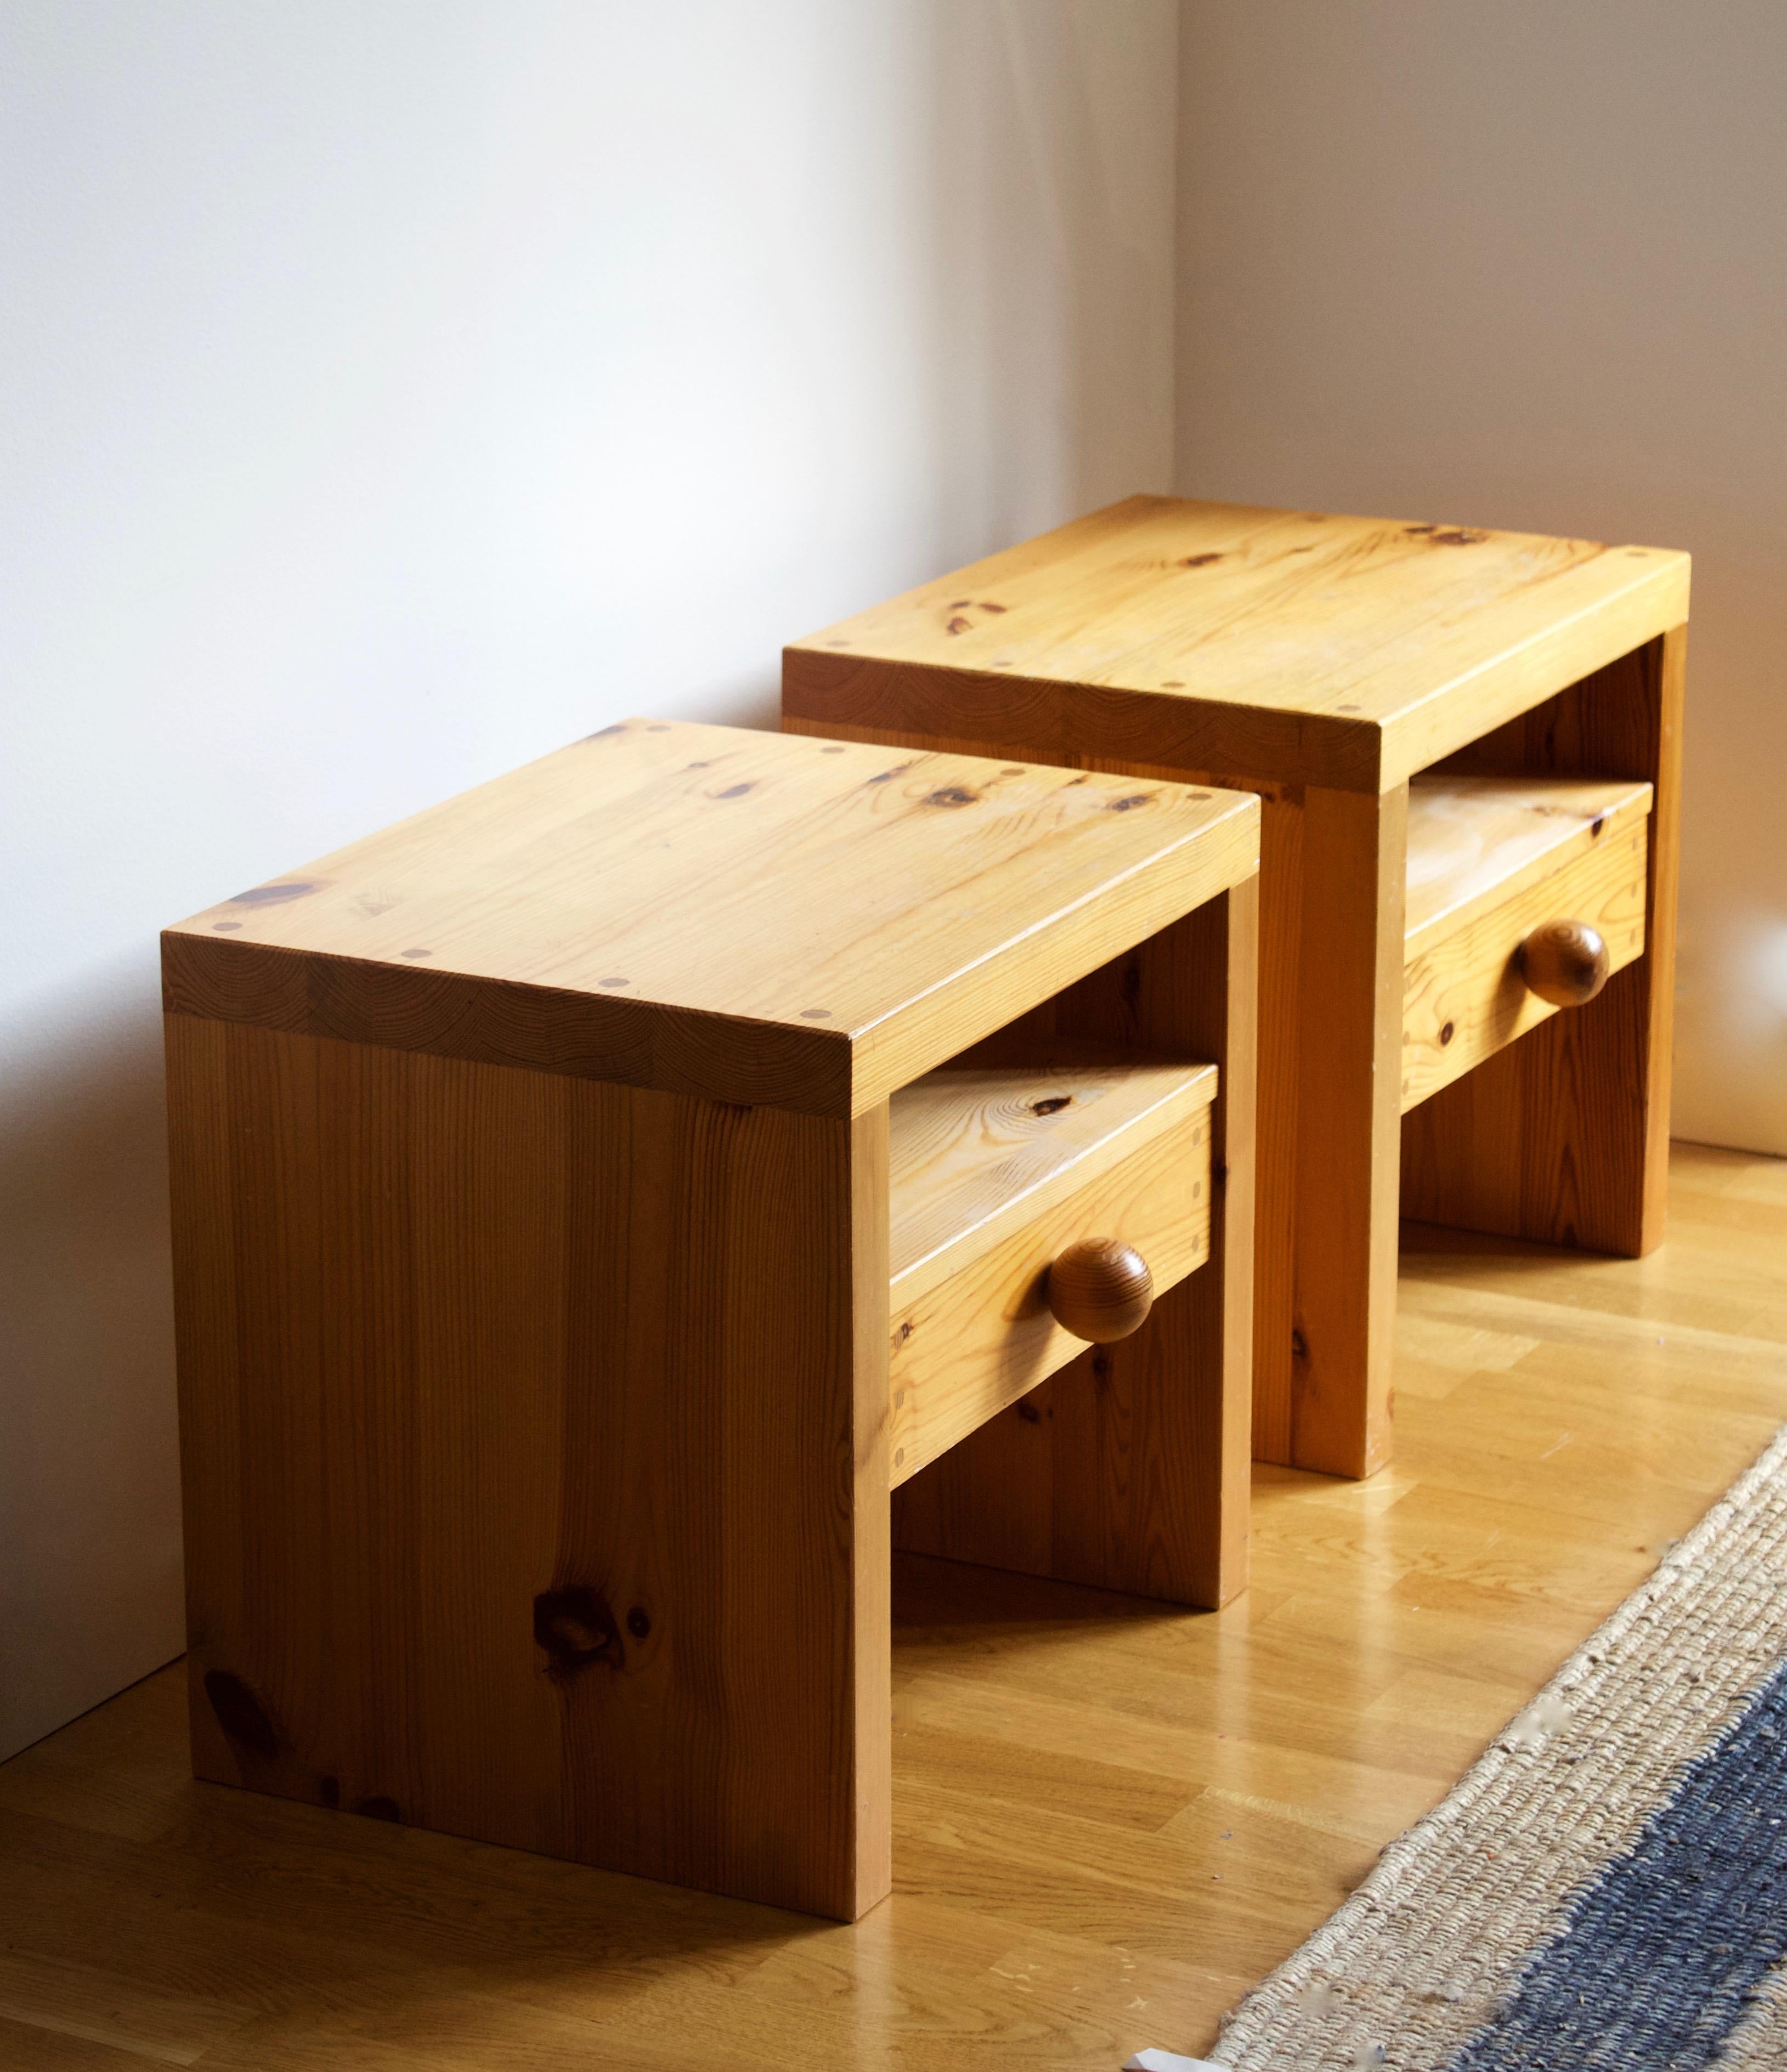 A set of bedside cabinets / tables / nightstands. Designed and produced in Sweden, 1970s. In solid pine. Features wooden joinery and drawers with finely turned round pulls.

Other designers working in similar style and materials include Axel Einar